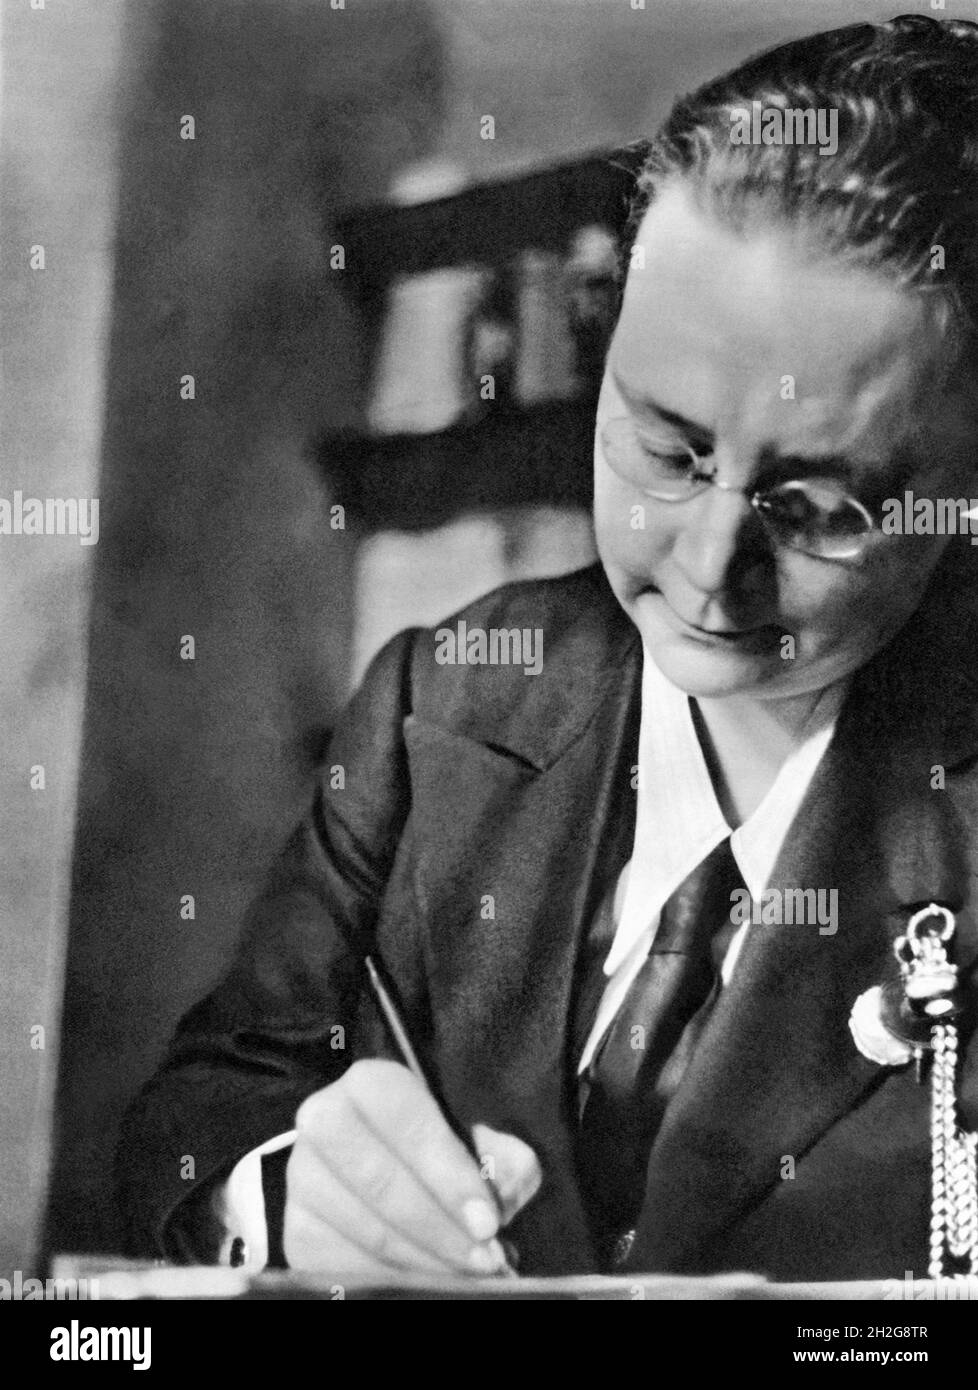 Dorothy Sayers (1893-1957), renowned English writer often considered one of the British authors informally known as 'The Inklings' (due to her friendship with C.S. Lewis and Charles Williams). Photo c1937. Stock Photo